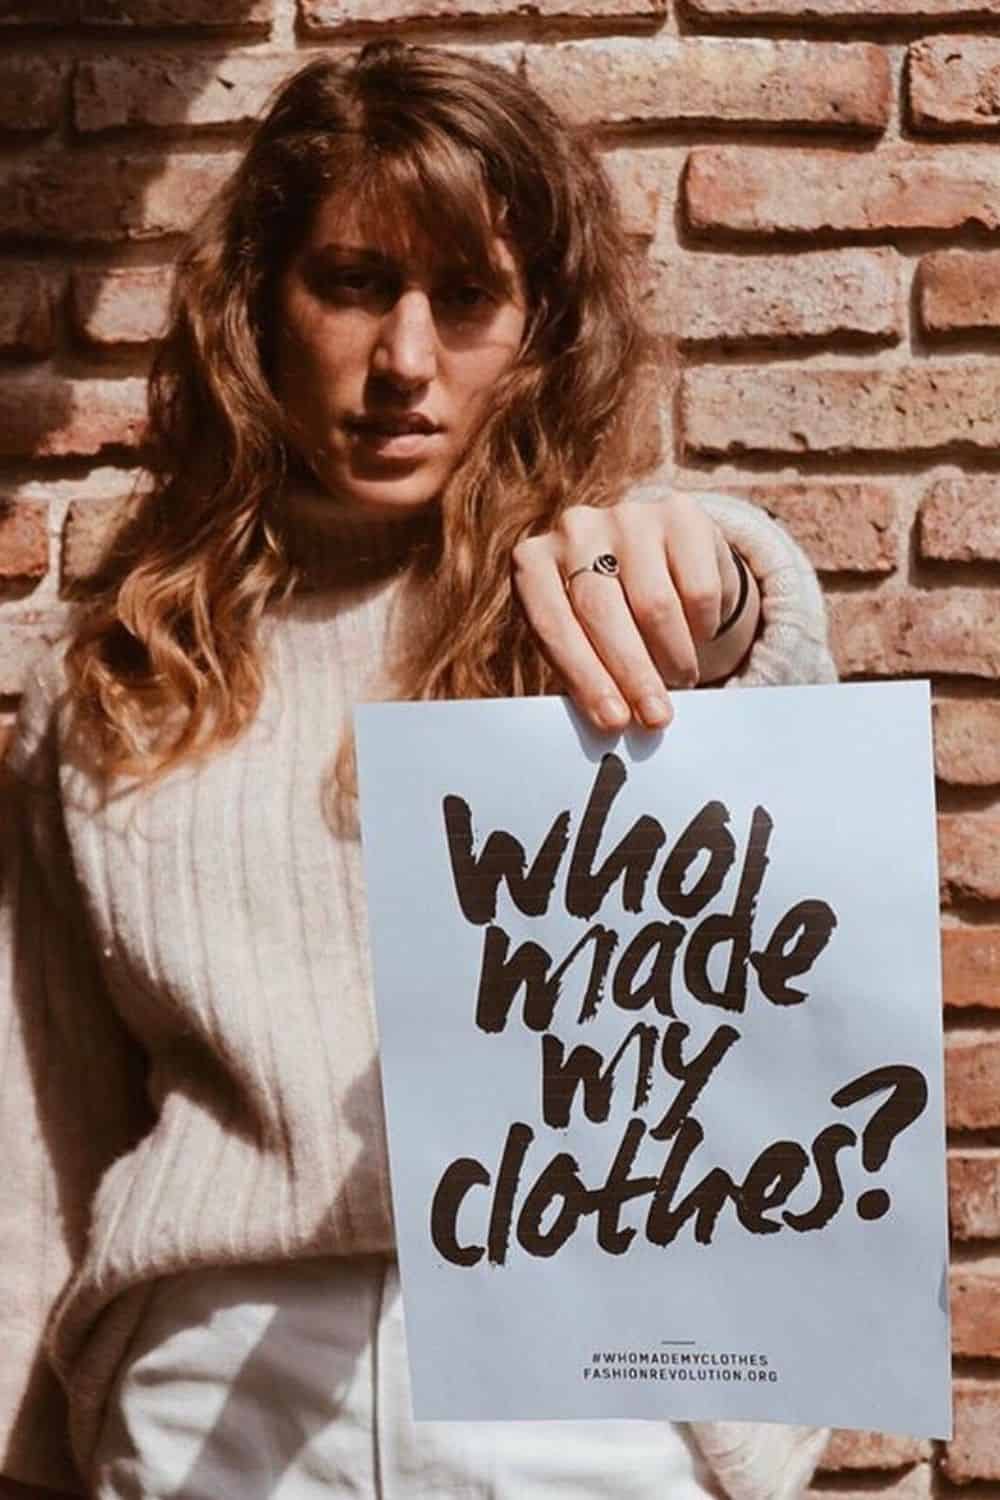 Remember the story about the tortoise and the hare? If you reach back to the depths of your childhood memory, you might remember the main takeaway being: faster isn’t necessarily better. And the same can be said for slow fashion. Image by Fashion Revolution #whatisslowfashion #whyslowfashionmatters #sustainablejungle